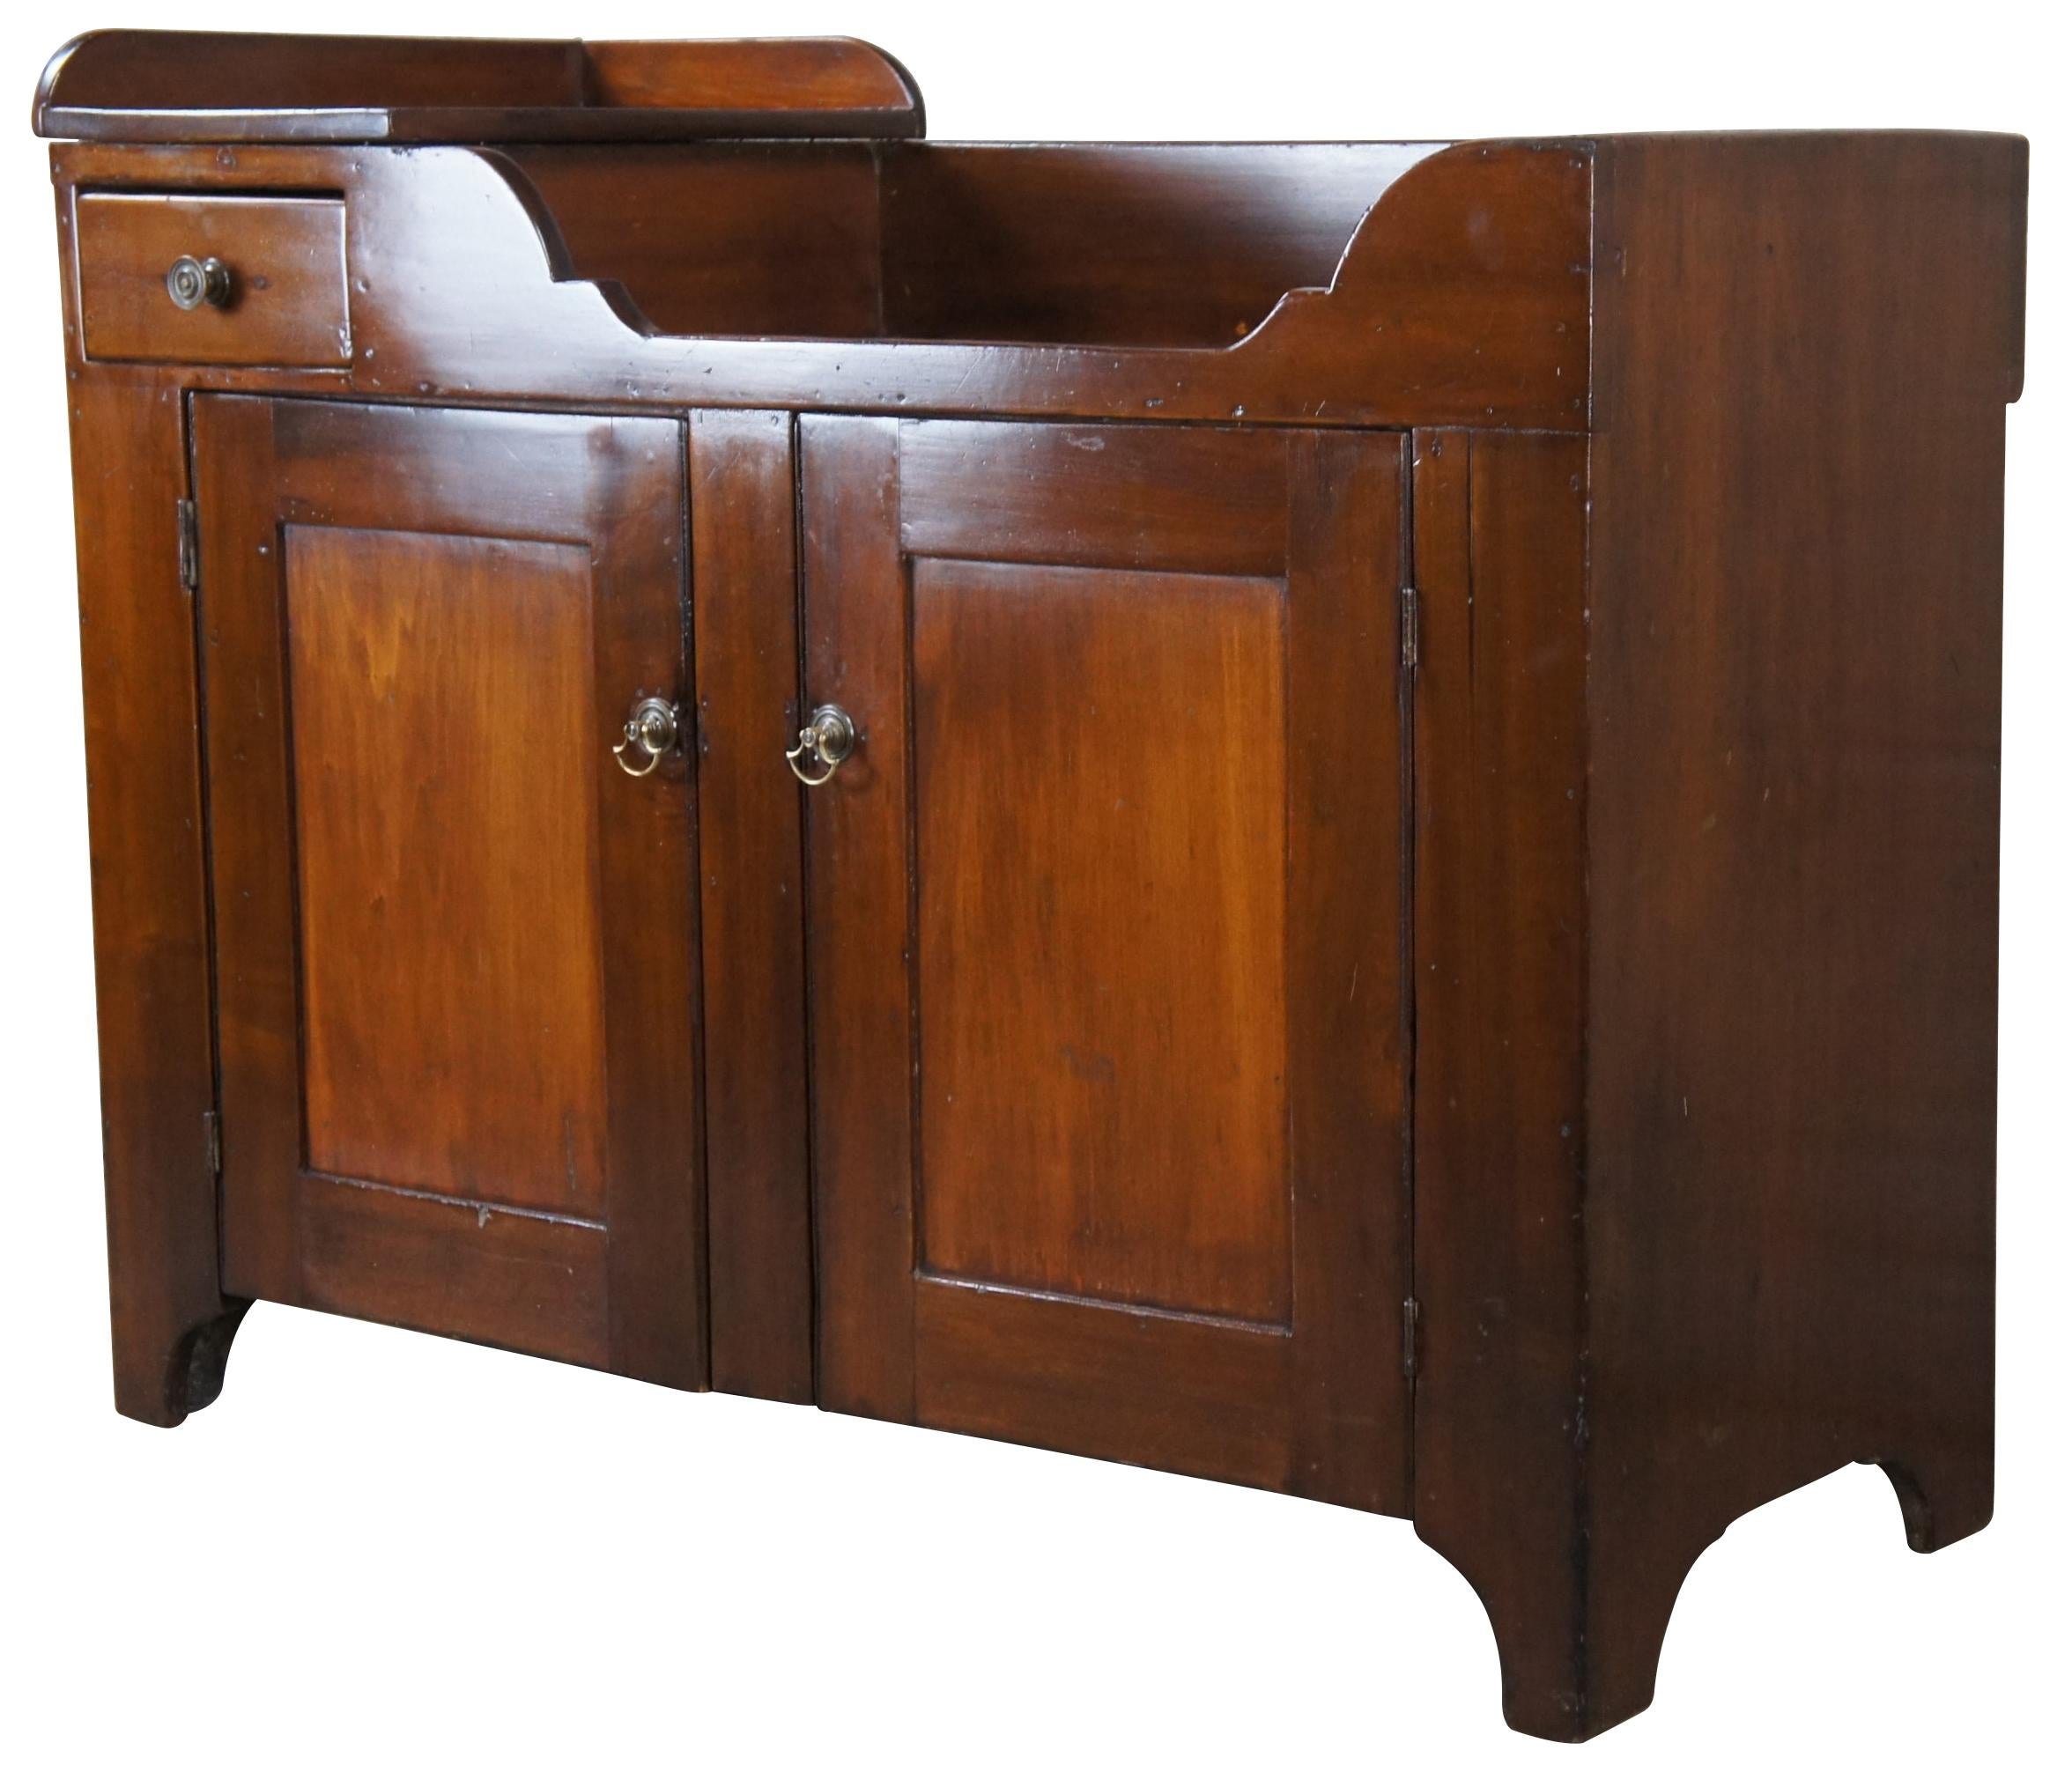 Antique Early American farmhouse dry sink or washstand cabinet. Made of walnut featuring two tiered upper surface with one drawer and two doors that open to lower shelves.

Measures: 42.25